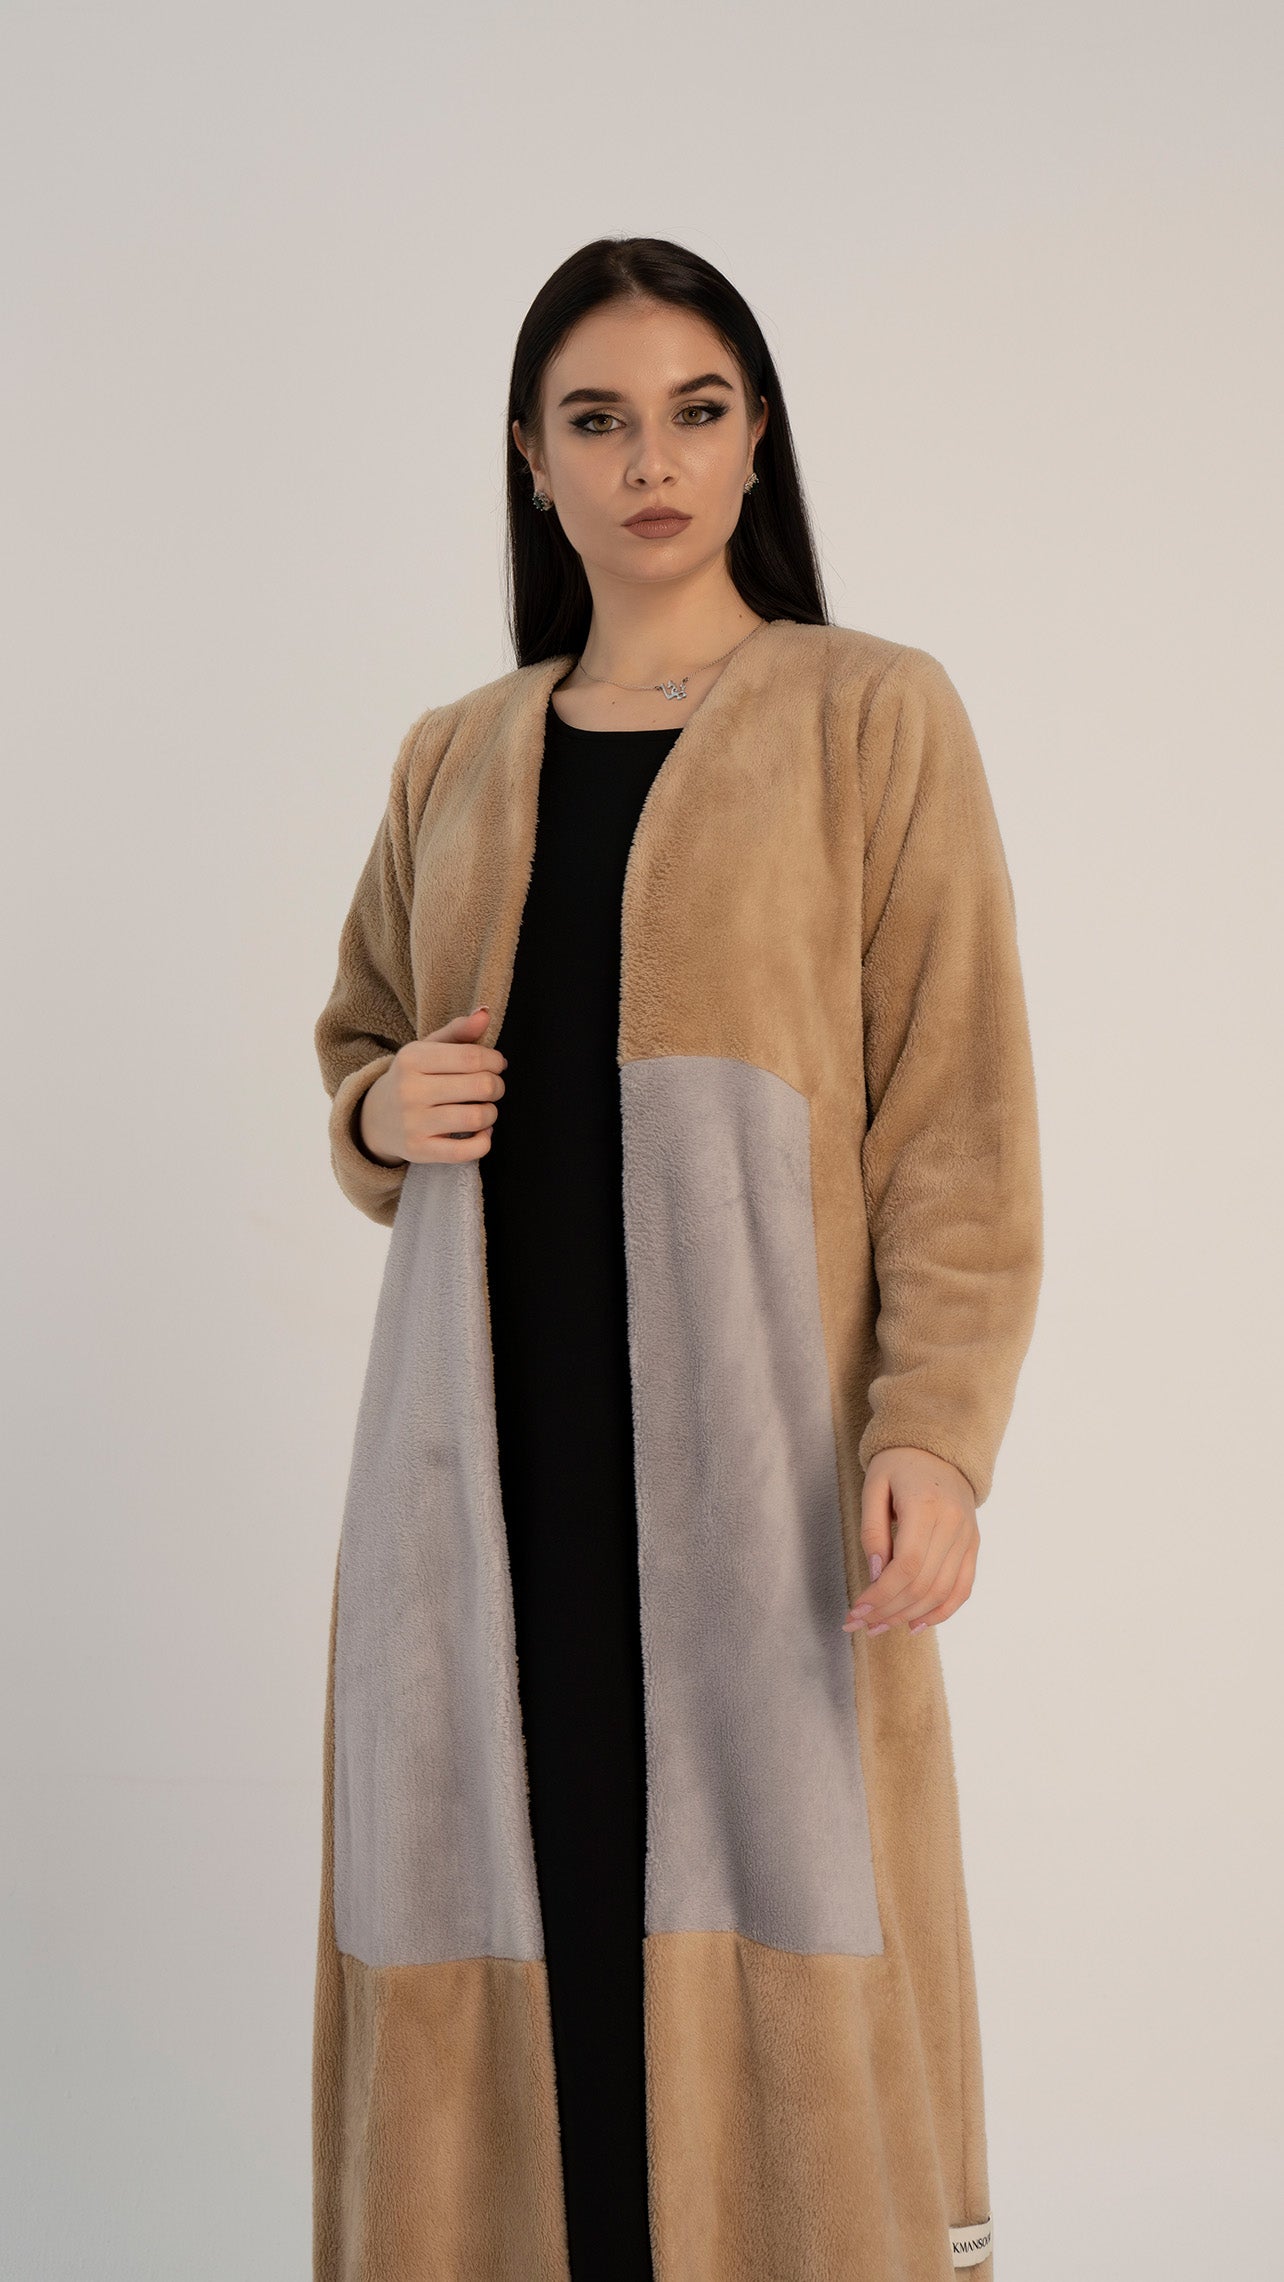 Woolen abaya with color block pattern on front.